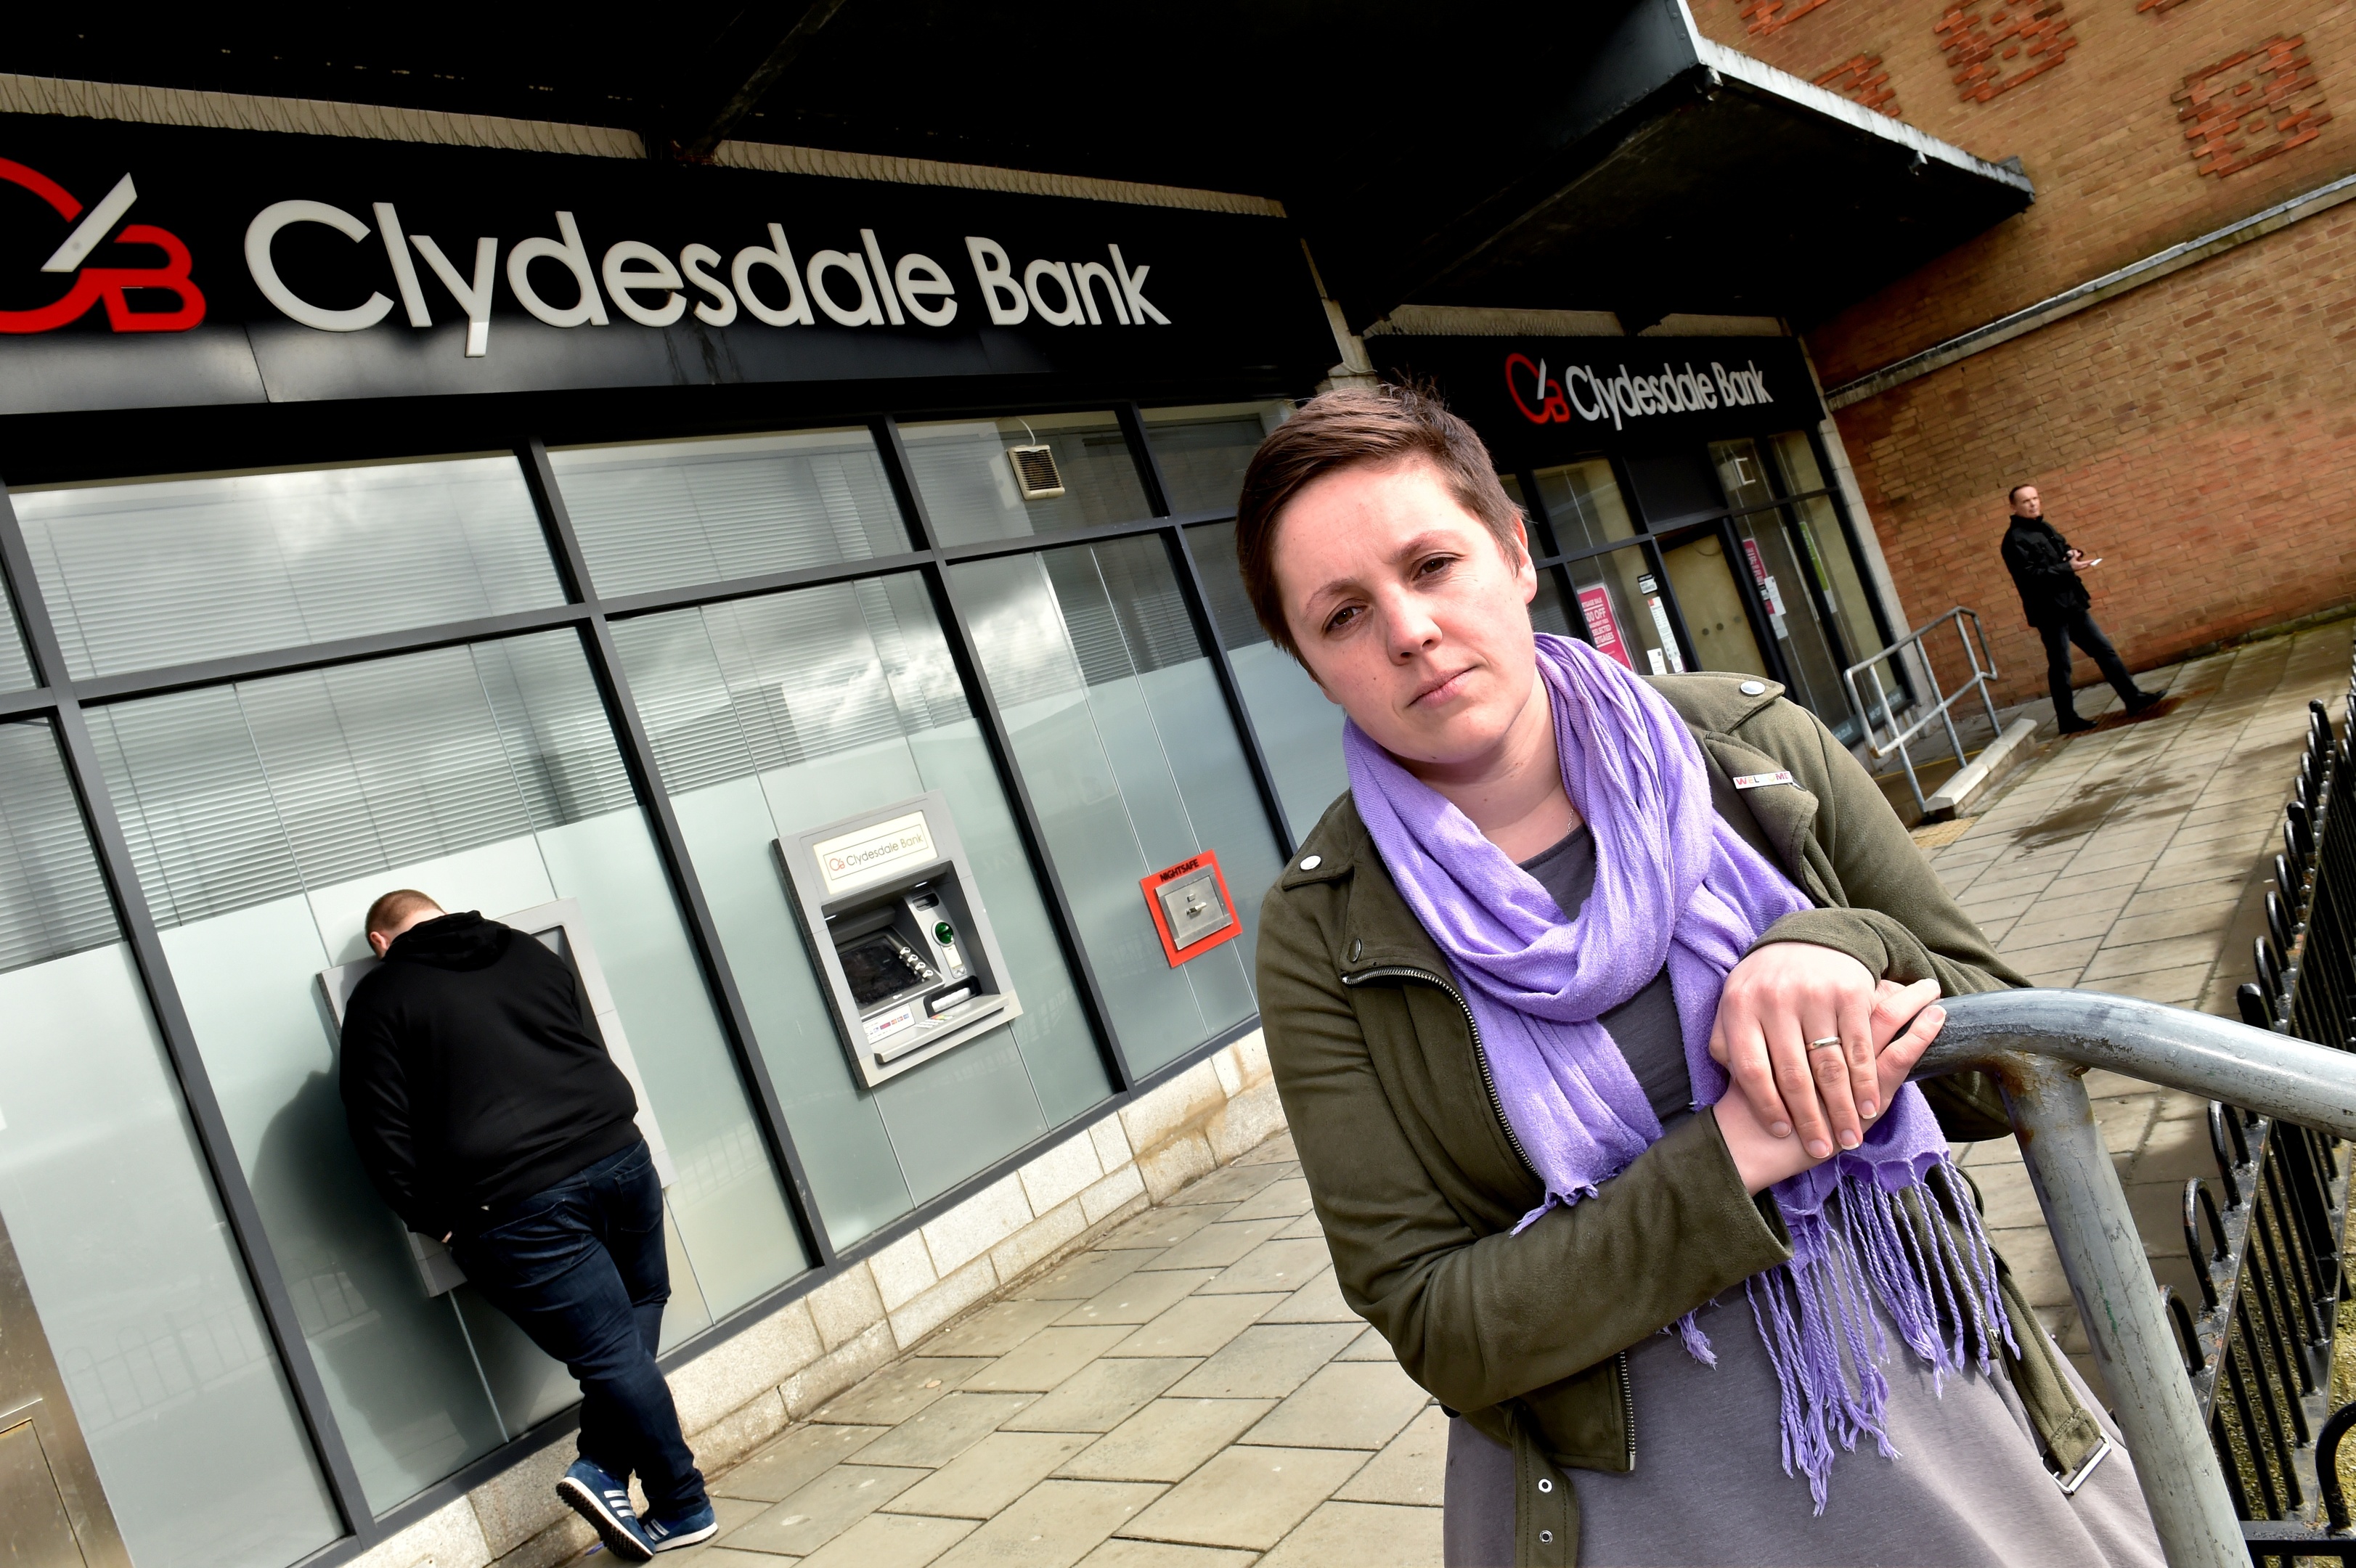 Aberdeen North MP Kirsty Blackman to meet Clydesdale Bank bosses for talks on proposed Mastrick branch closure.